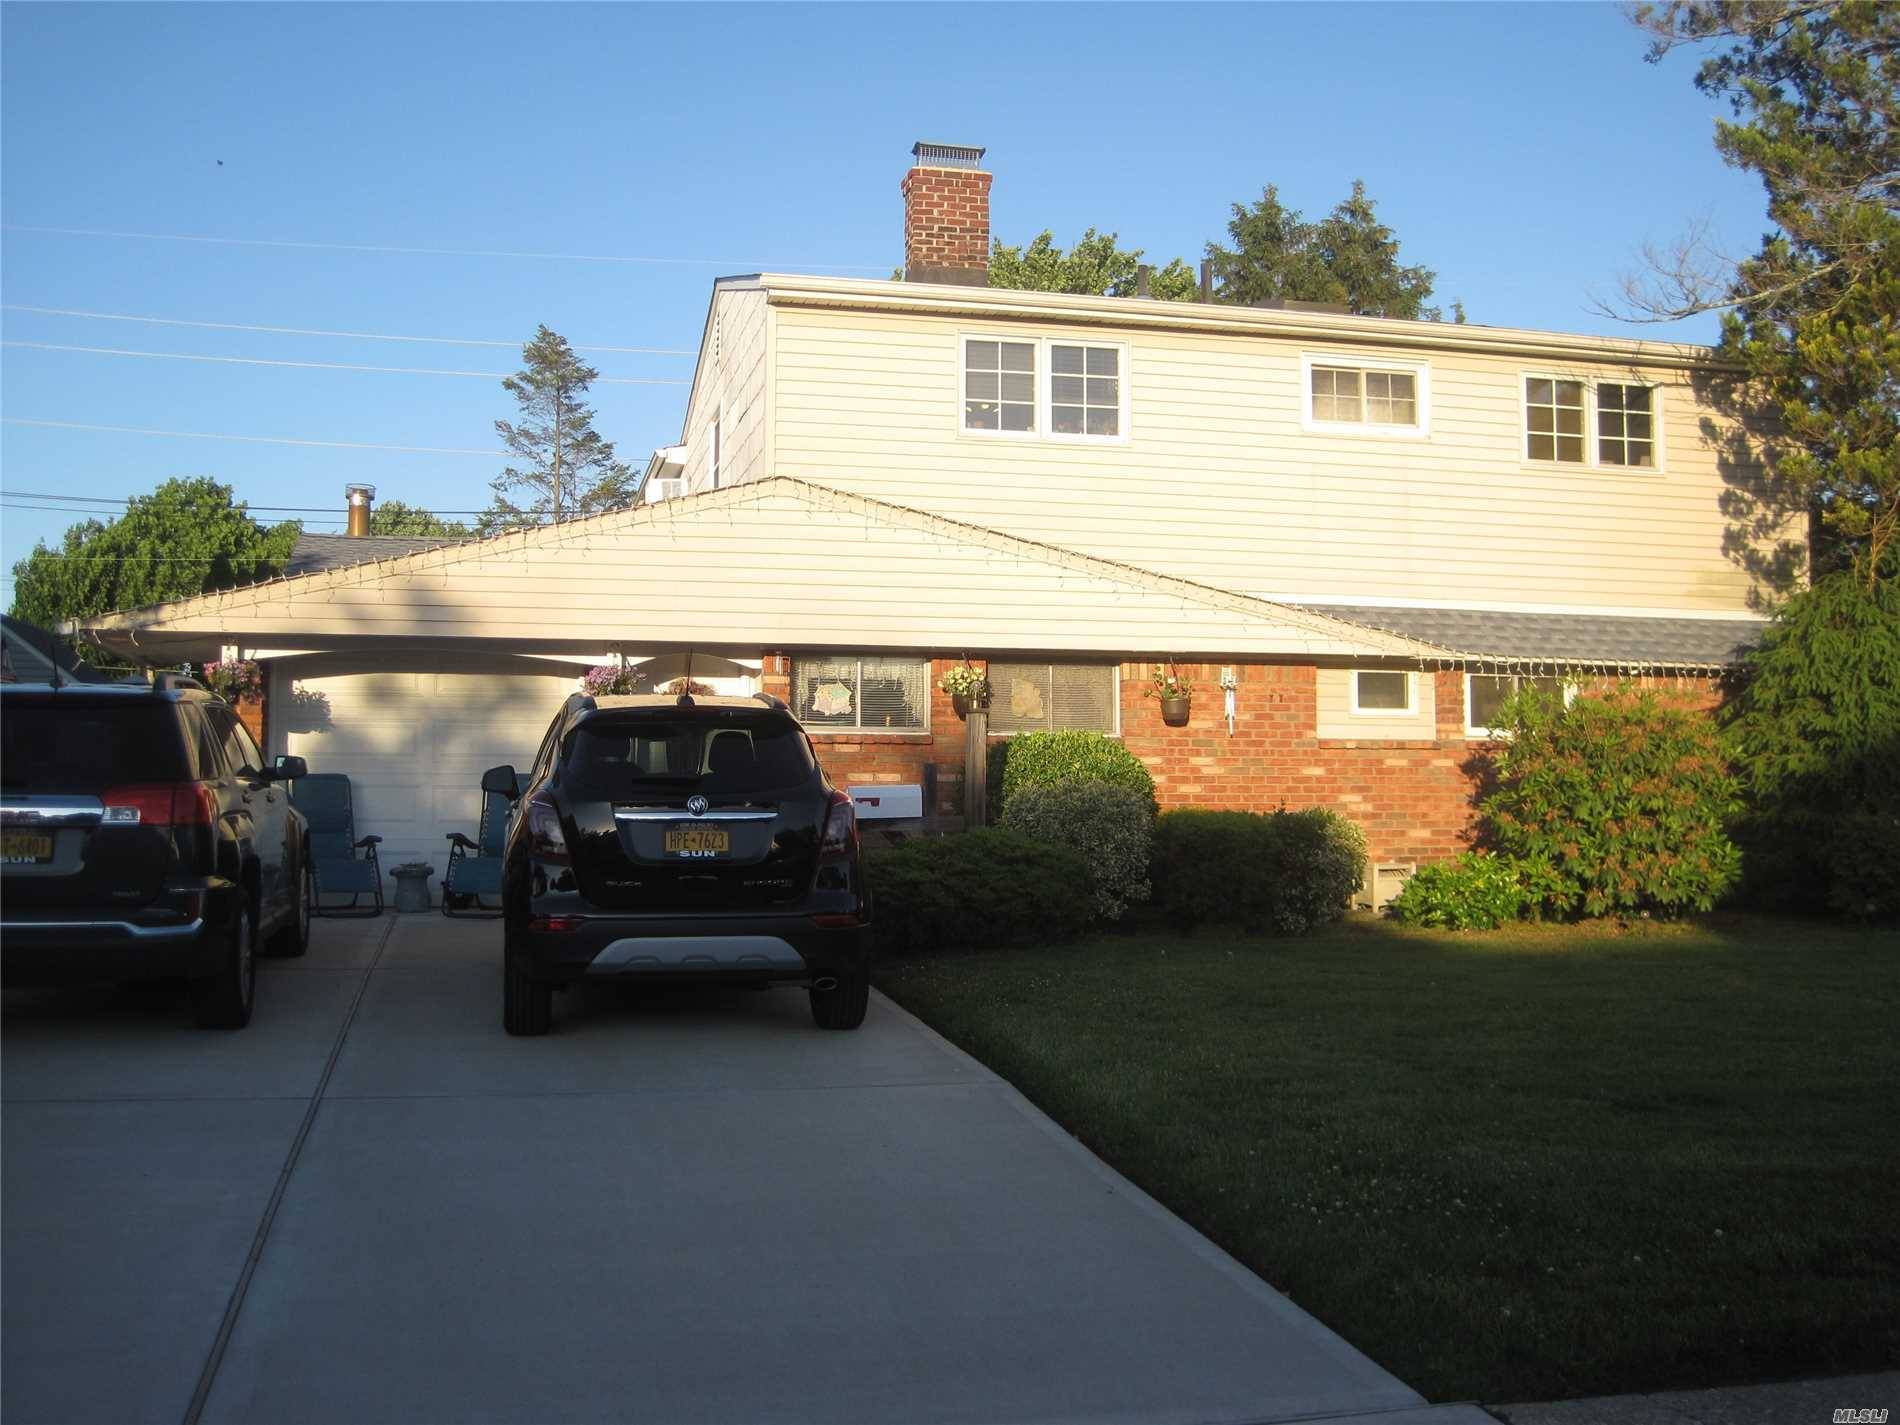 If you are looking for a spacious colonial or mother daughter need to file proper permits with Town of Hempstead boasting 12 rooms and true park like grounds.